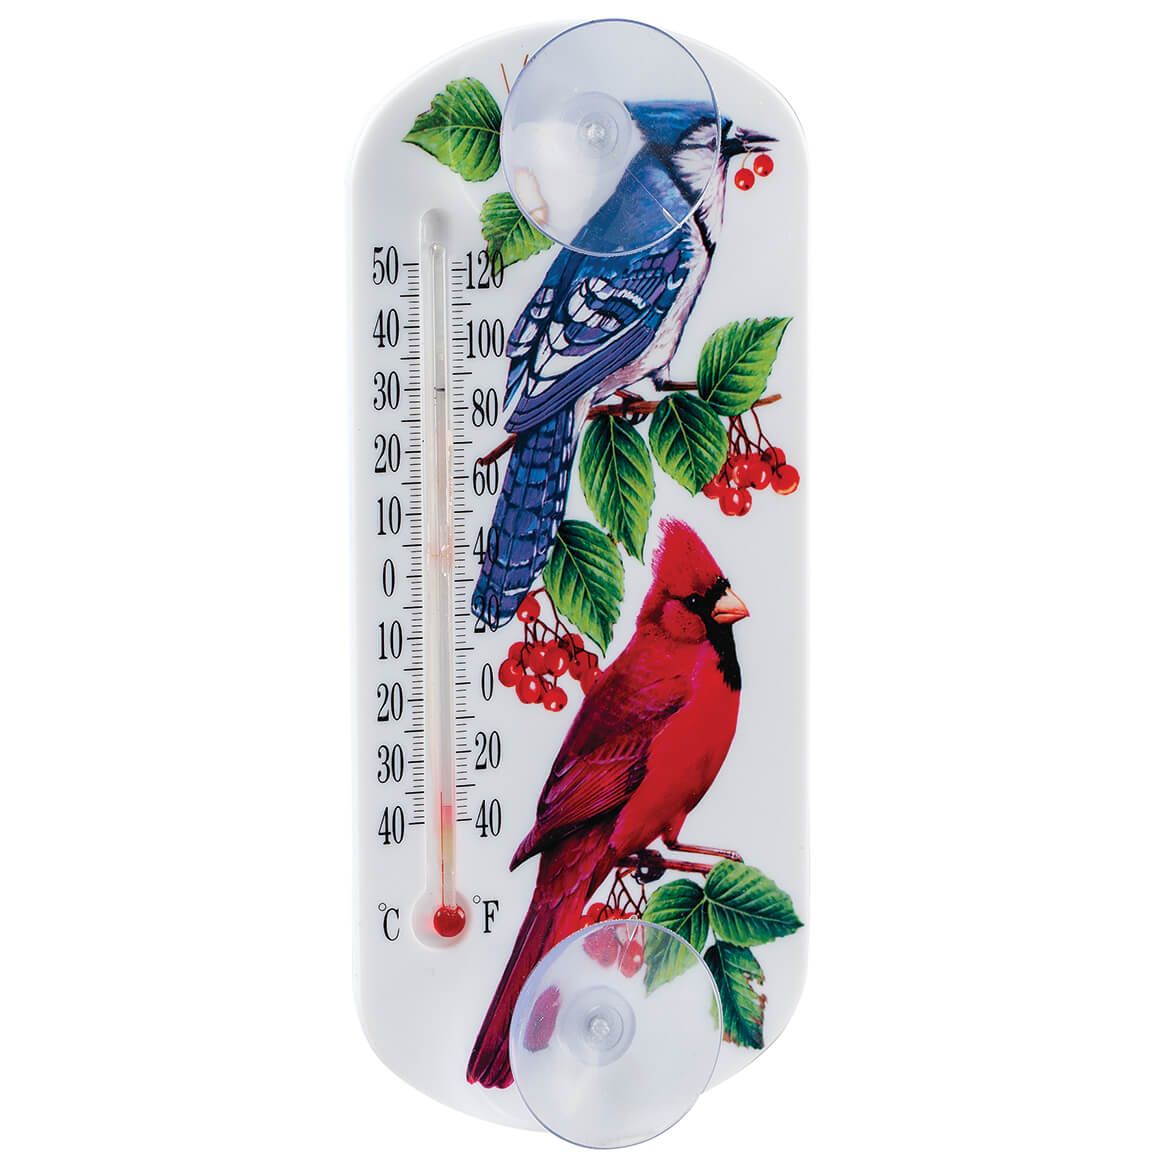 Feathered Friends Thermometer + '-' + 374838